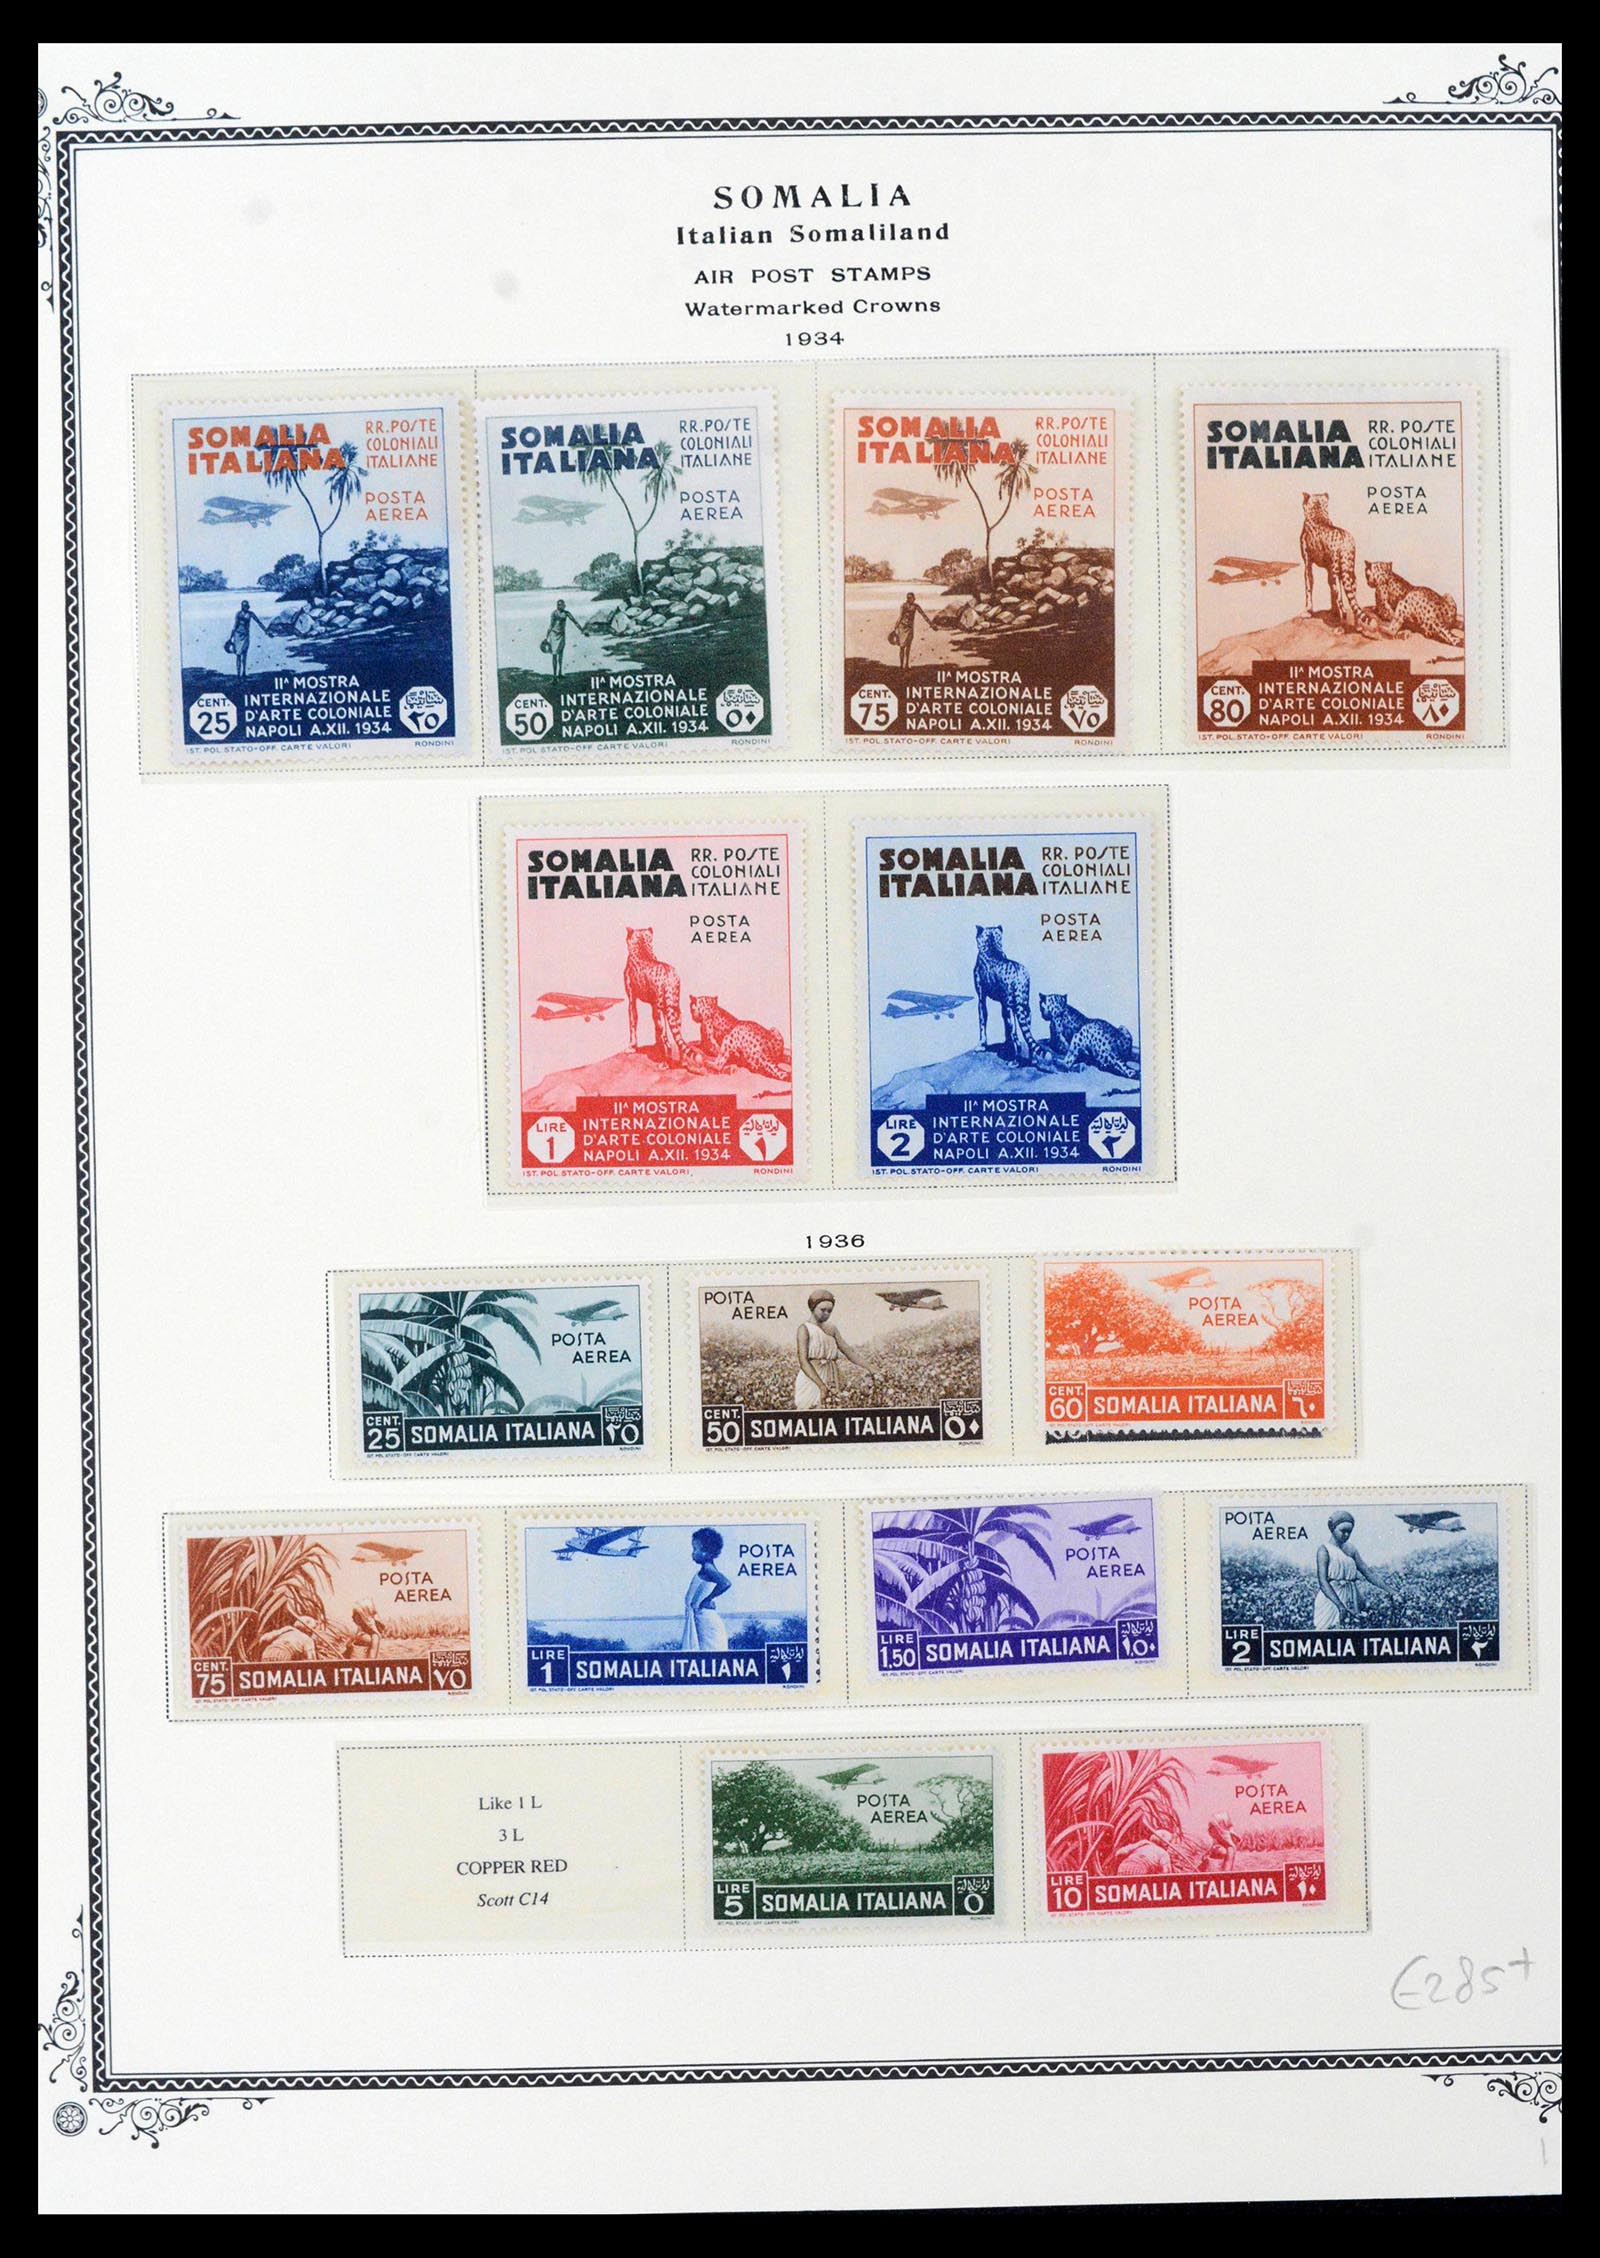 39011 0030 - Stamp collection 39011 Somalia complete 1903-1960.